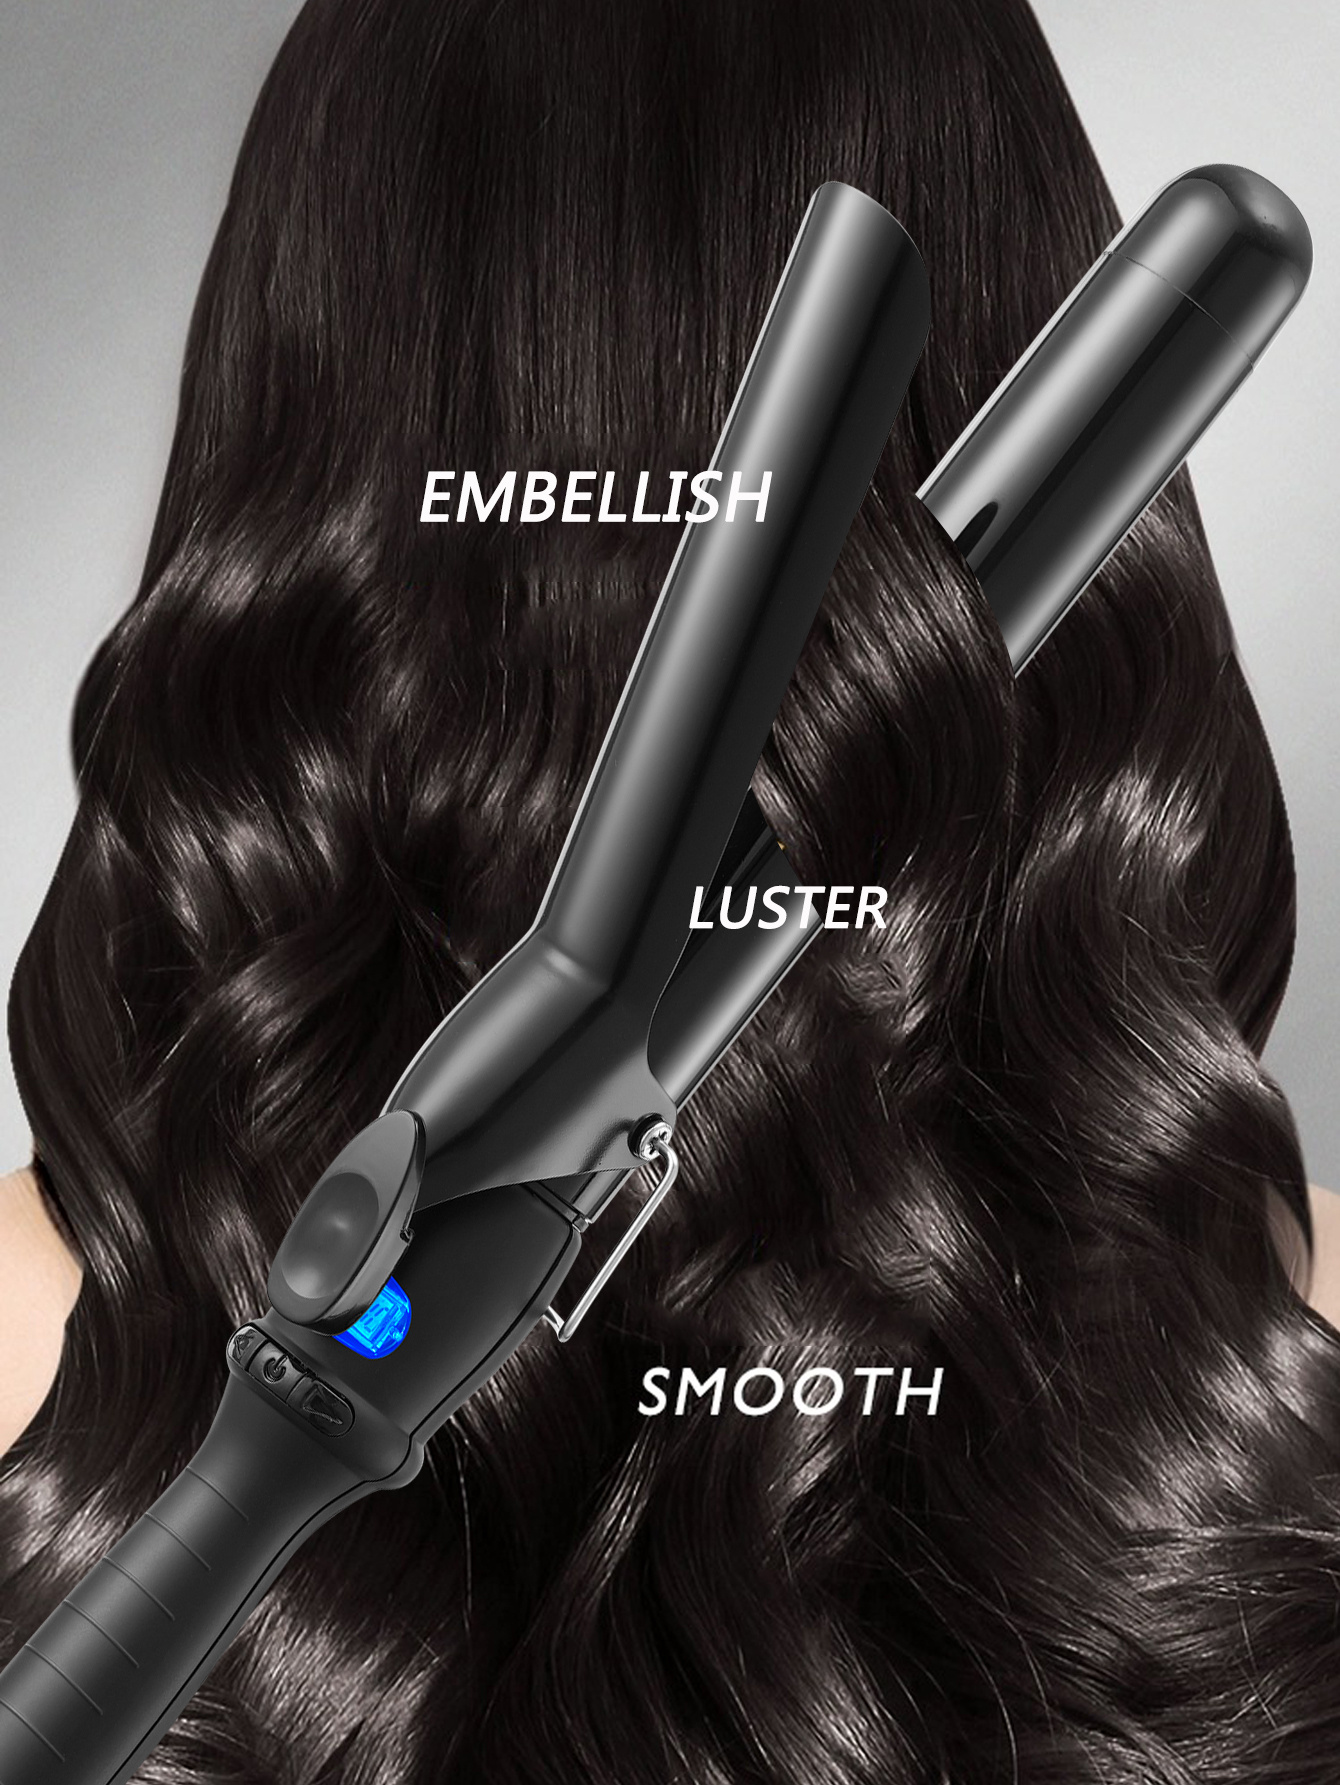 32mm Professional Ceramic Clipped Curling Iron Hair Curler Negative Ion Hair Curling Wand Electric Curling Iron details 3